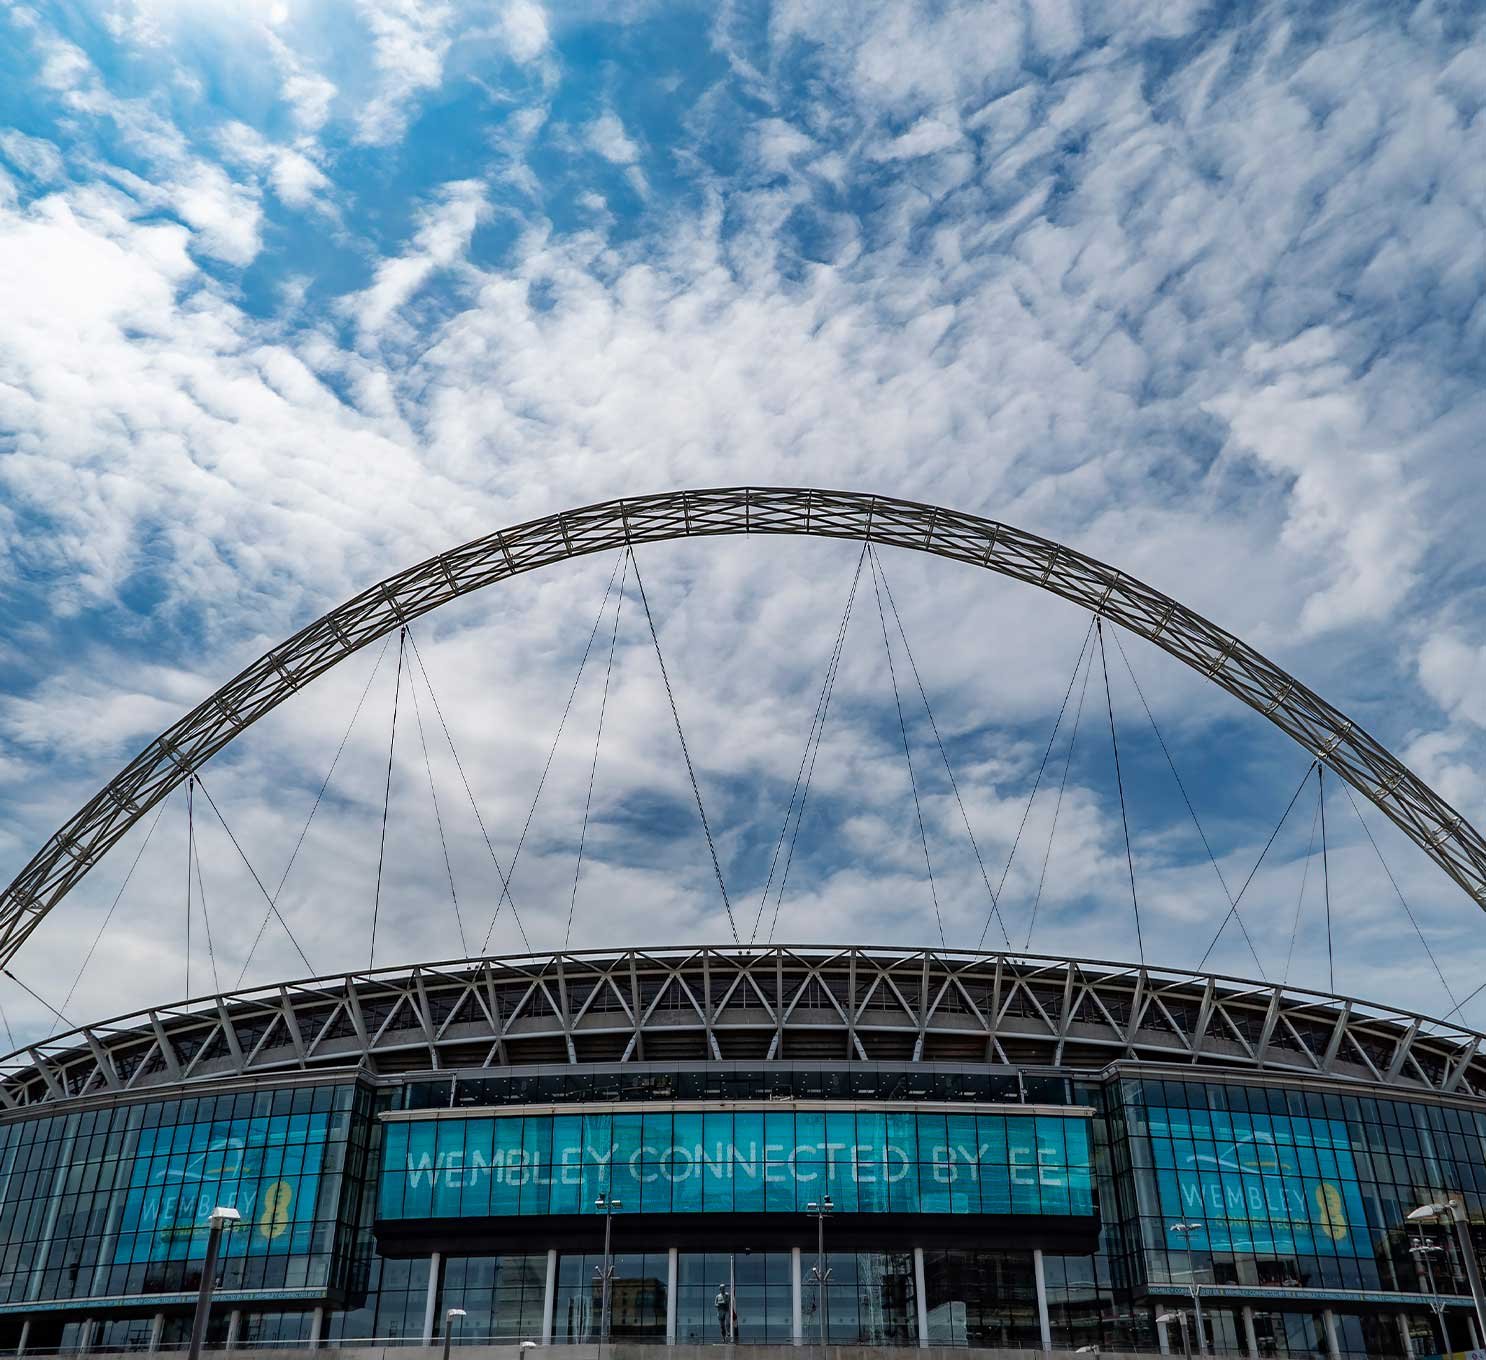 A view of the front of Wembley stadium